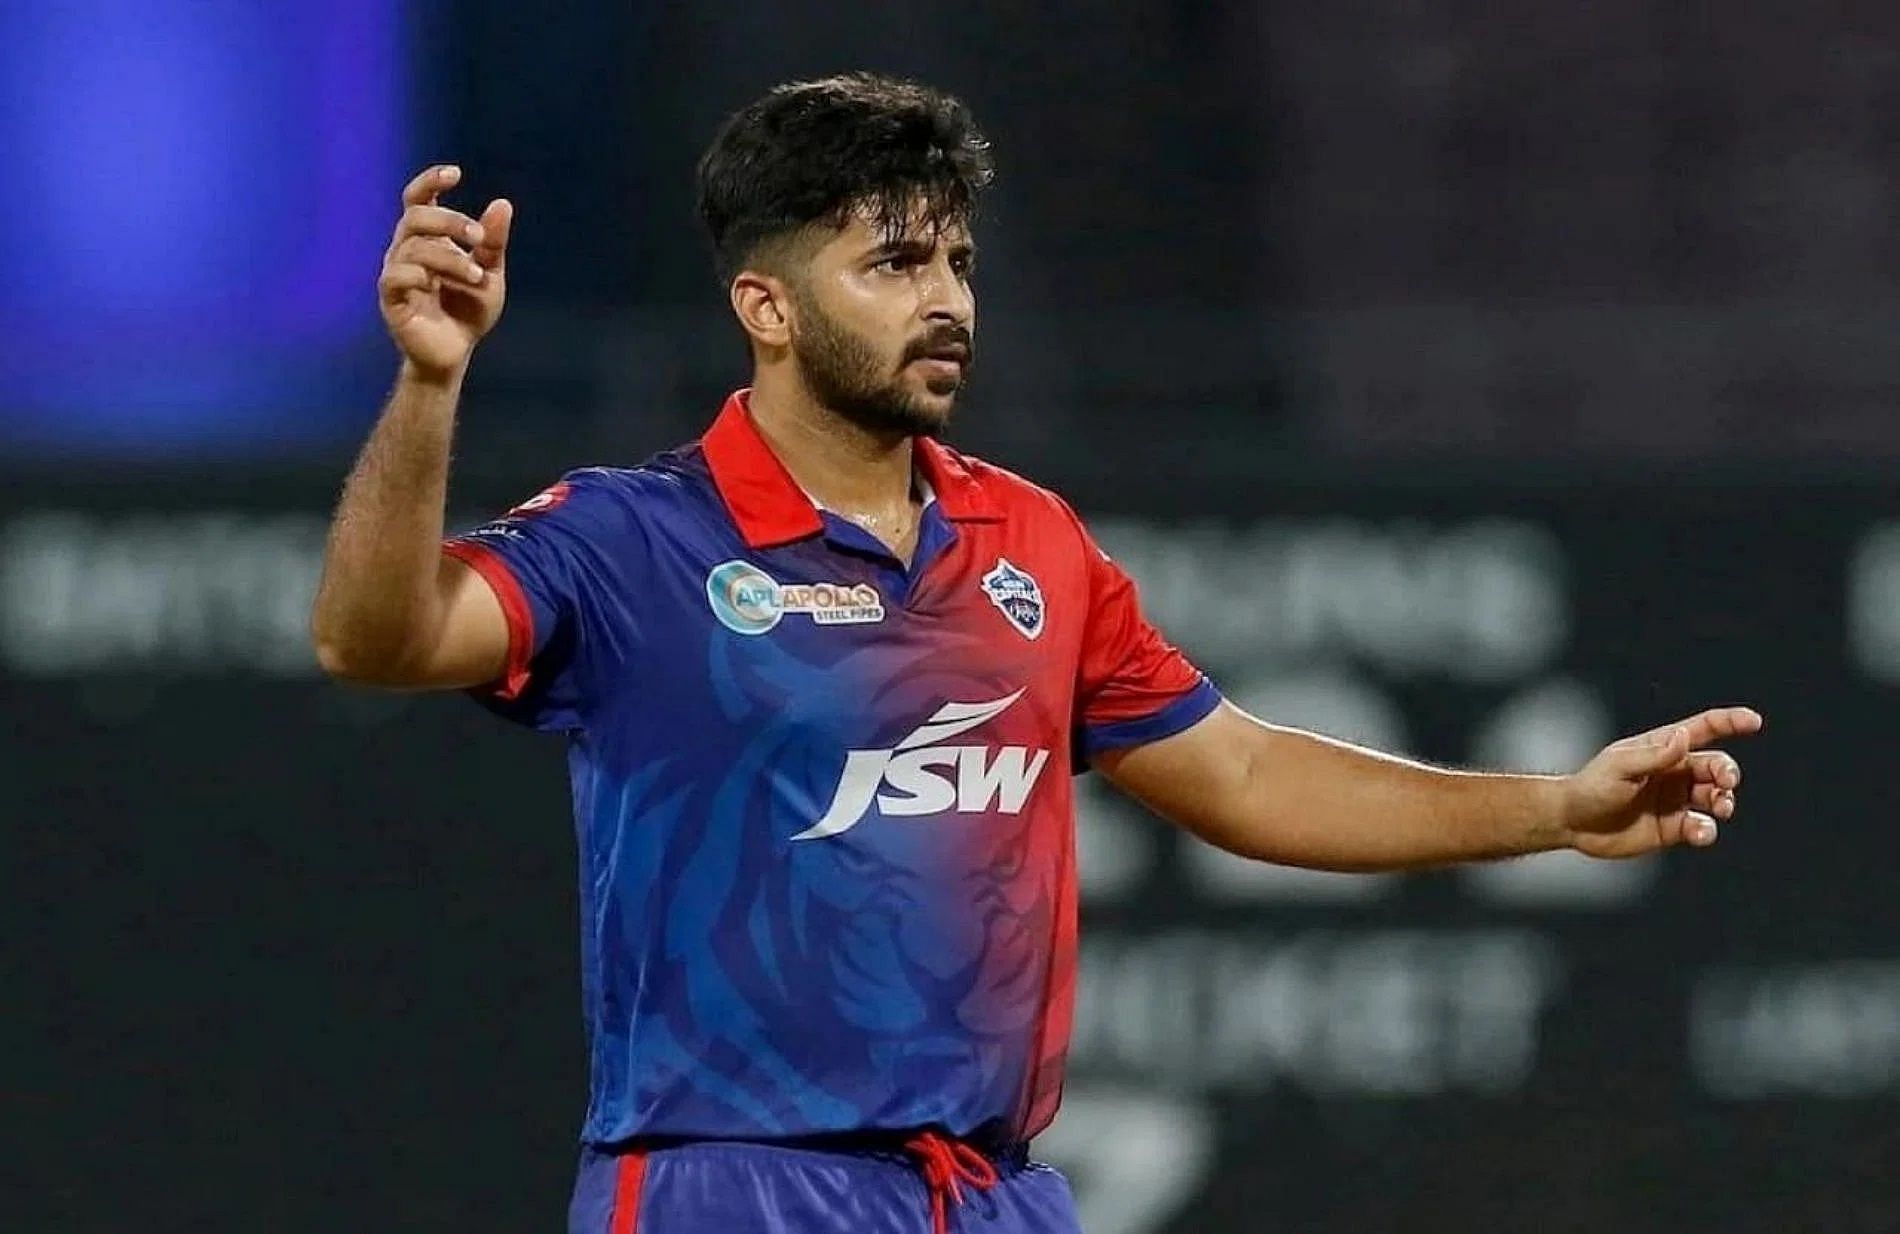 Shardul Thakur was one of the players traded in by the Kolkata Knight Riders. [P/C: iplt20.com]